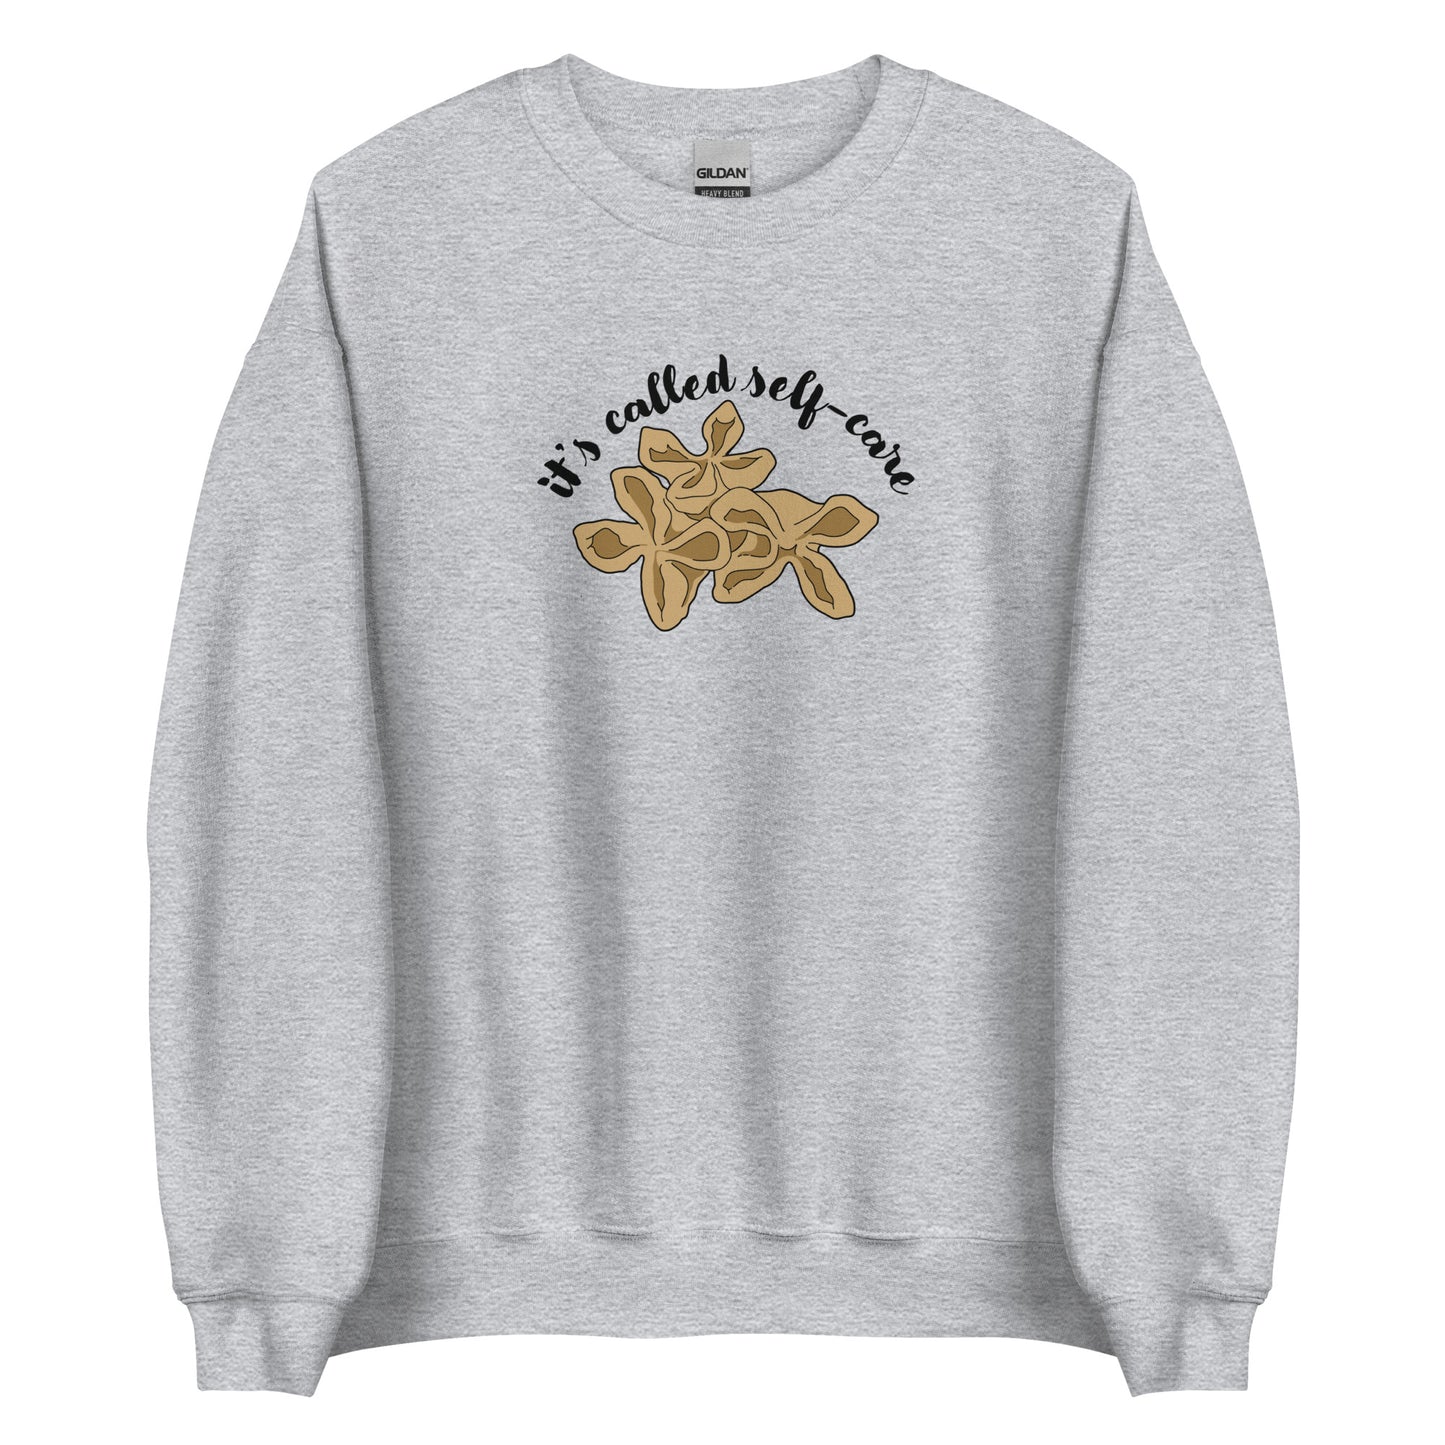 A gray crewneck sweatshirt featuring an illustration of three pieces of crab rangoon. Text in an arc above the crab rangoon reads "it's called self-care" in a cursive script.